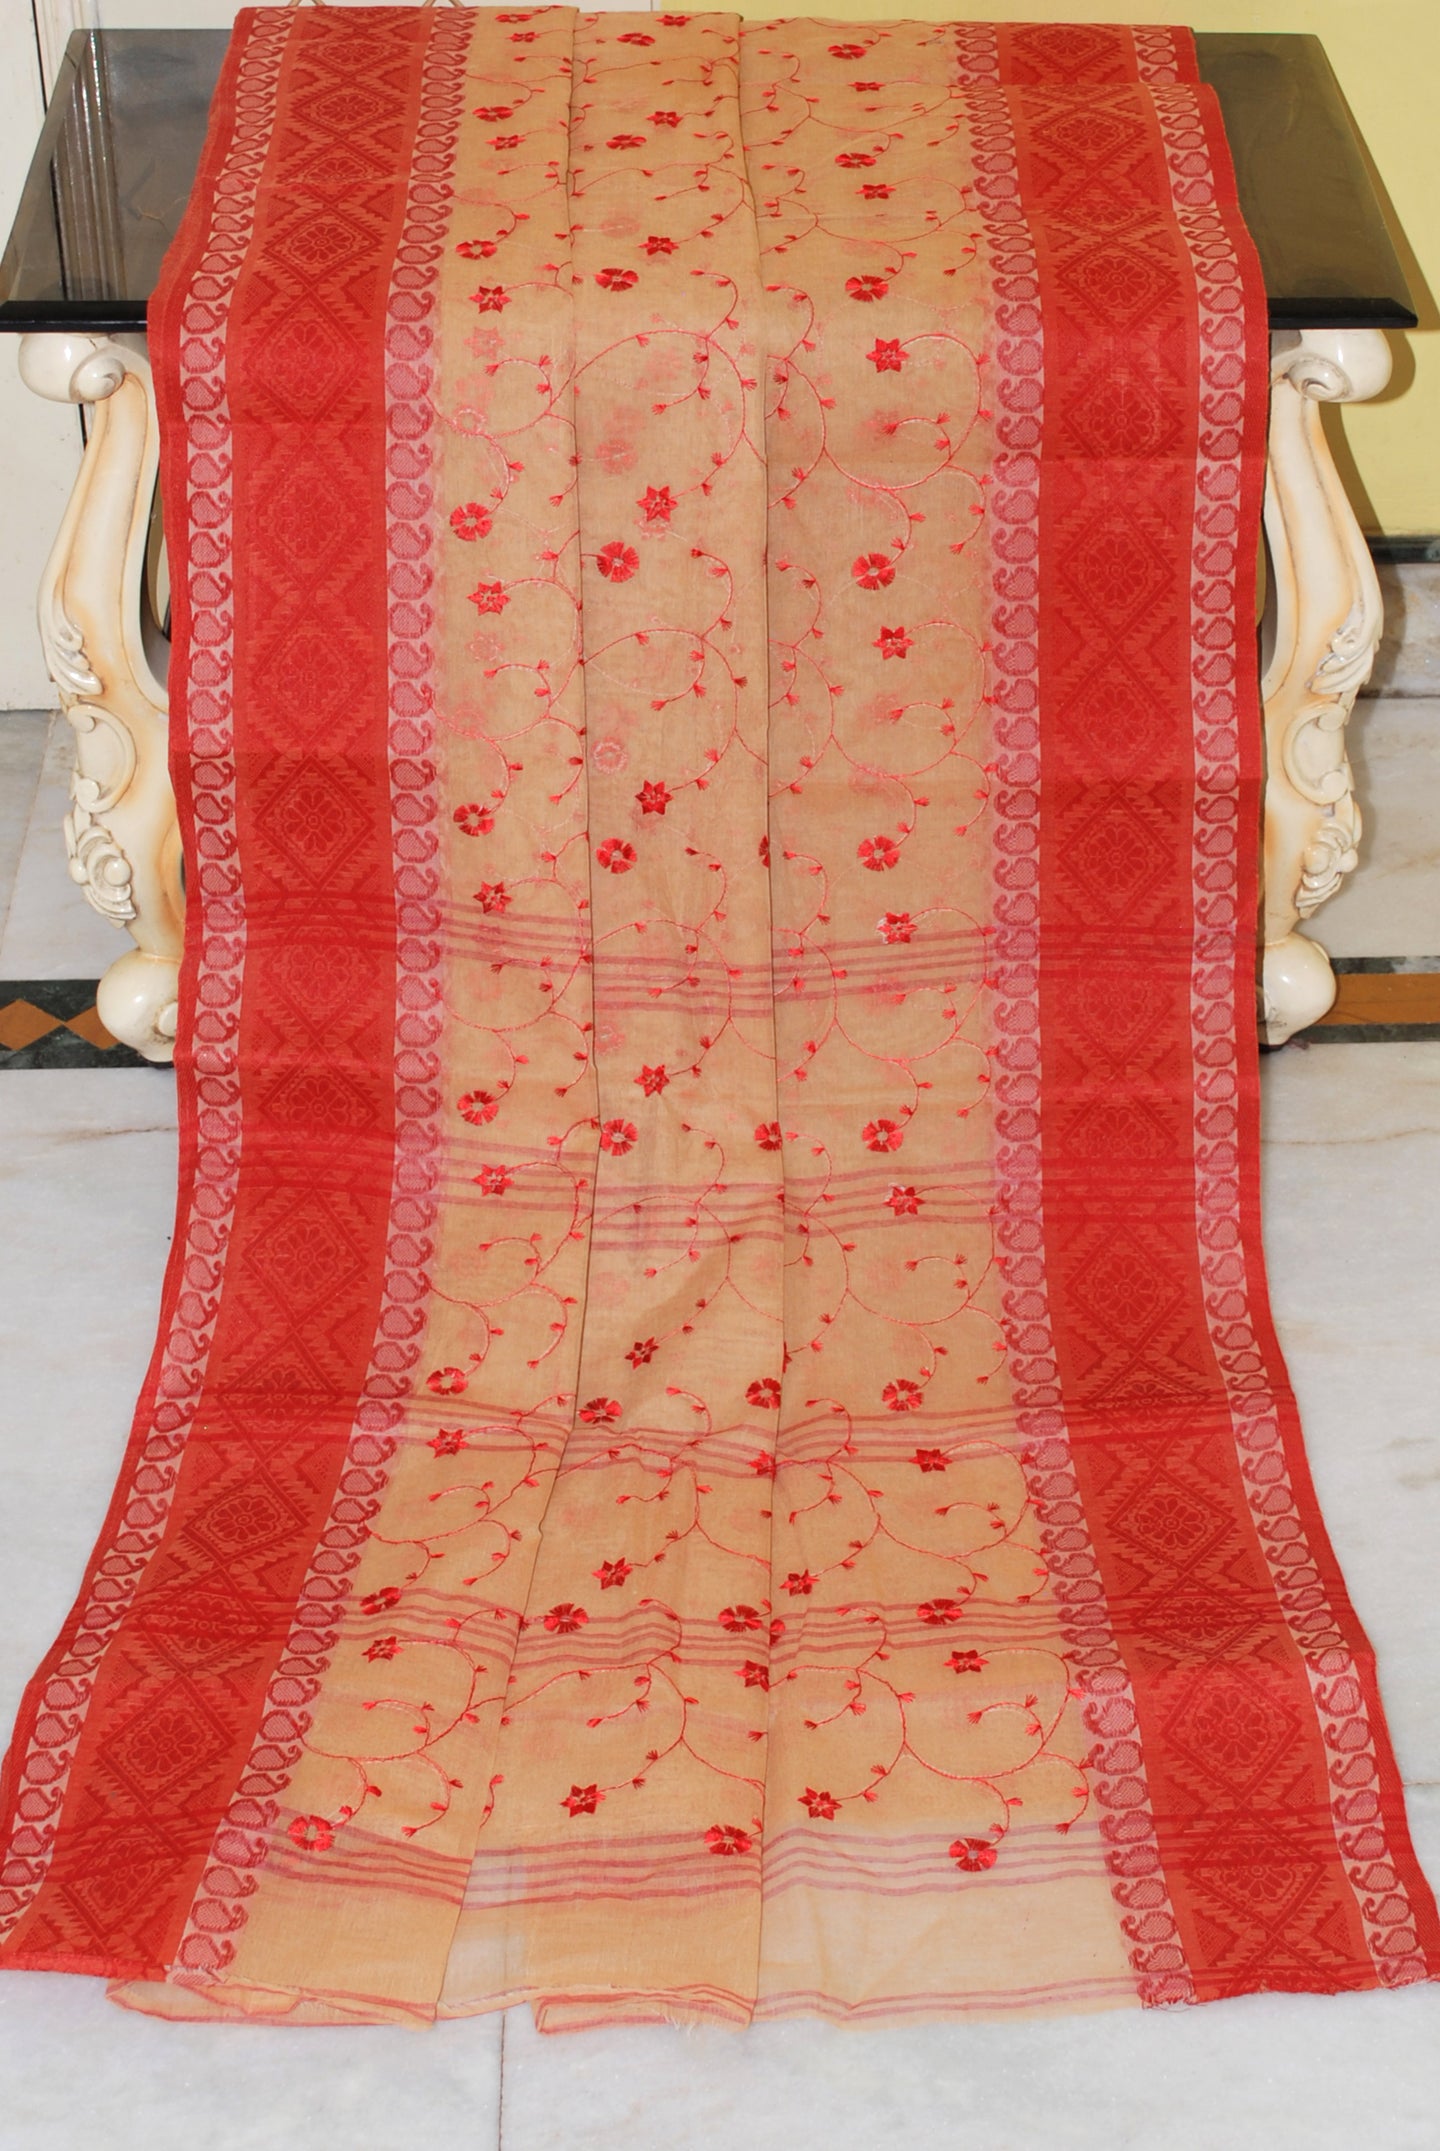 Bengal Handloom Cotton Saree with Floral Jaal Embroidery Work in Biscotti and Red